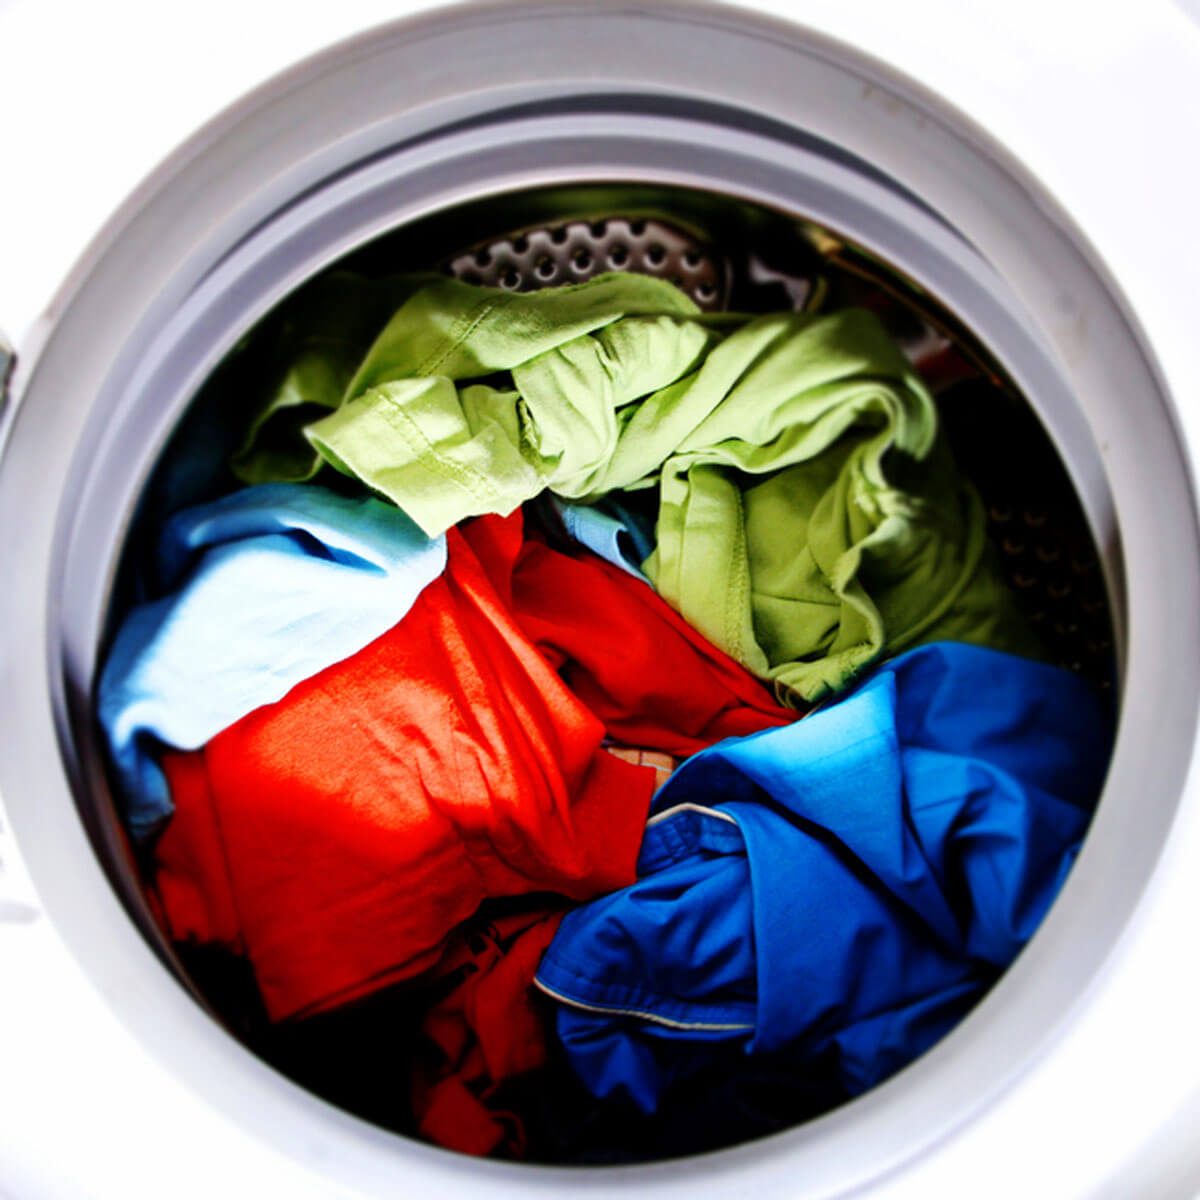 Laundry Bluing : Secrets for Brighter Laundry